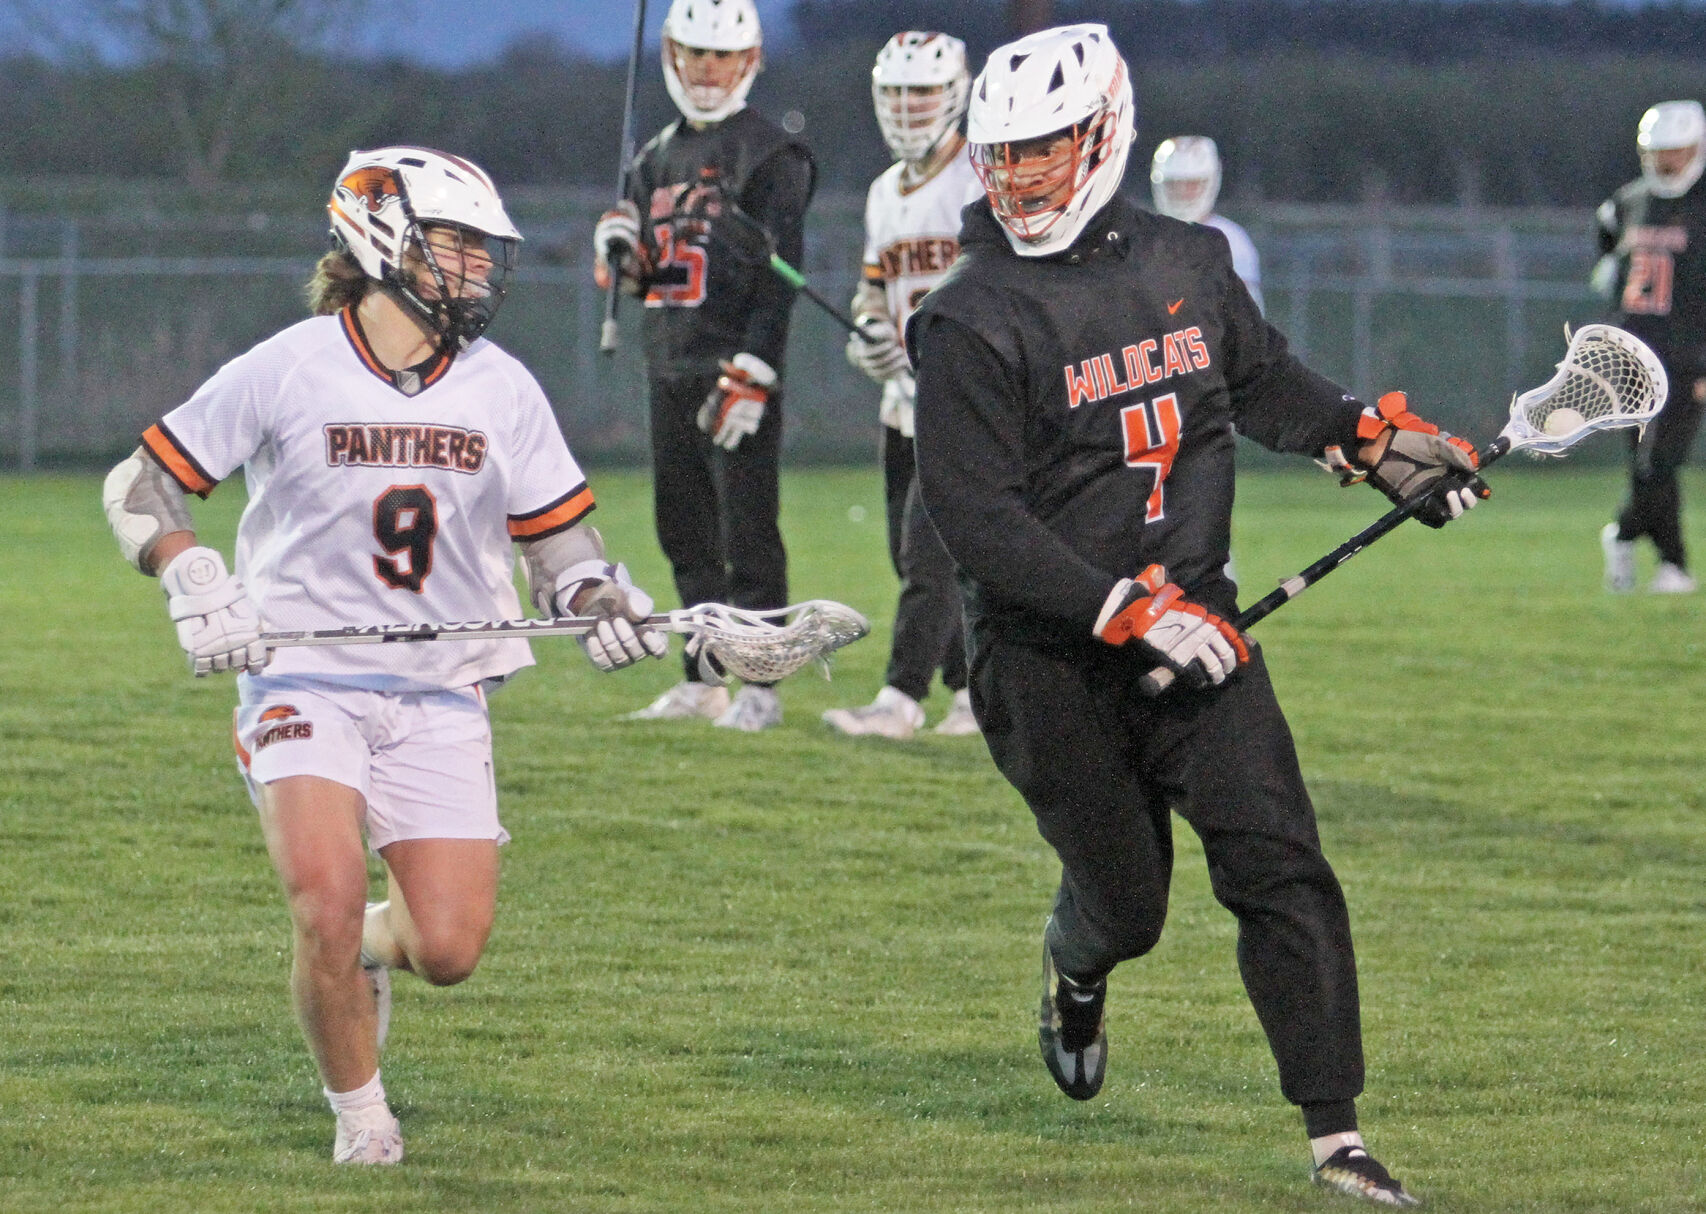 Verona Boys Lacrosse Lose Streak with 9-6 Defeat to Mukwonago – Game Highlights & Standout Players